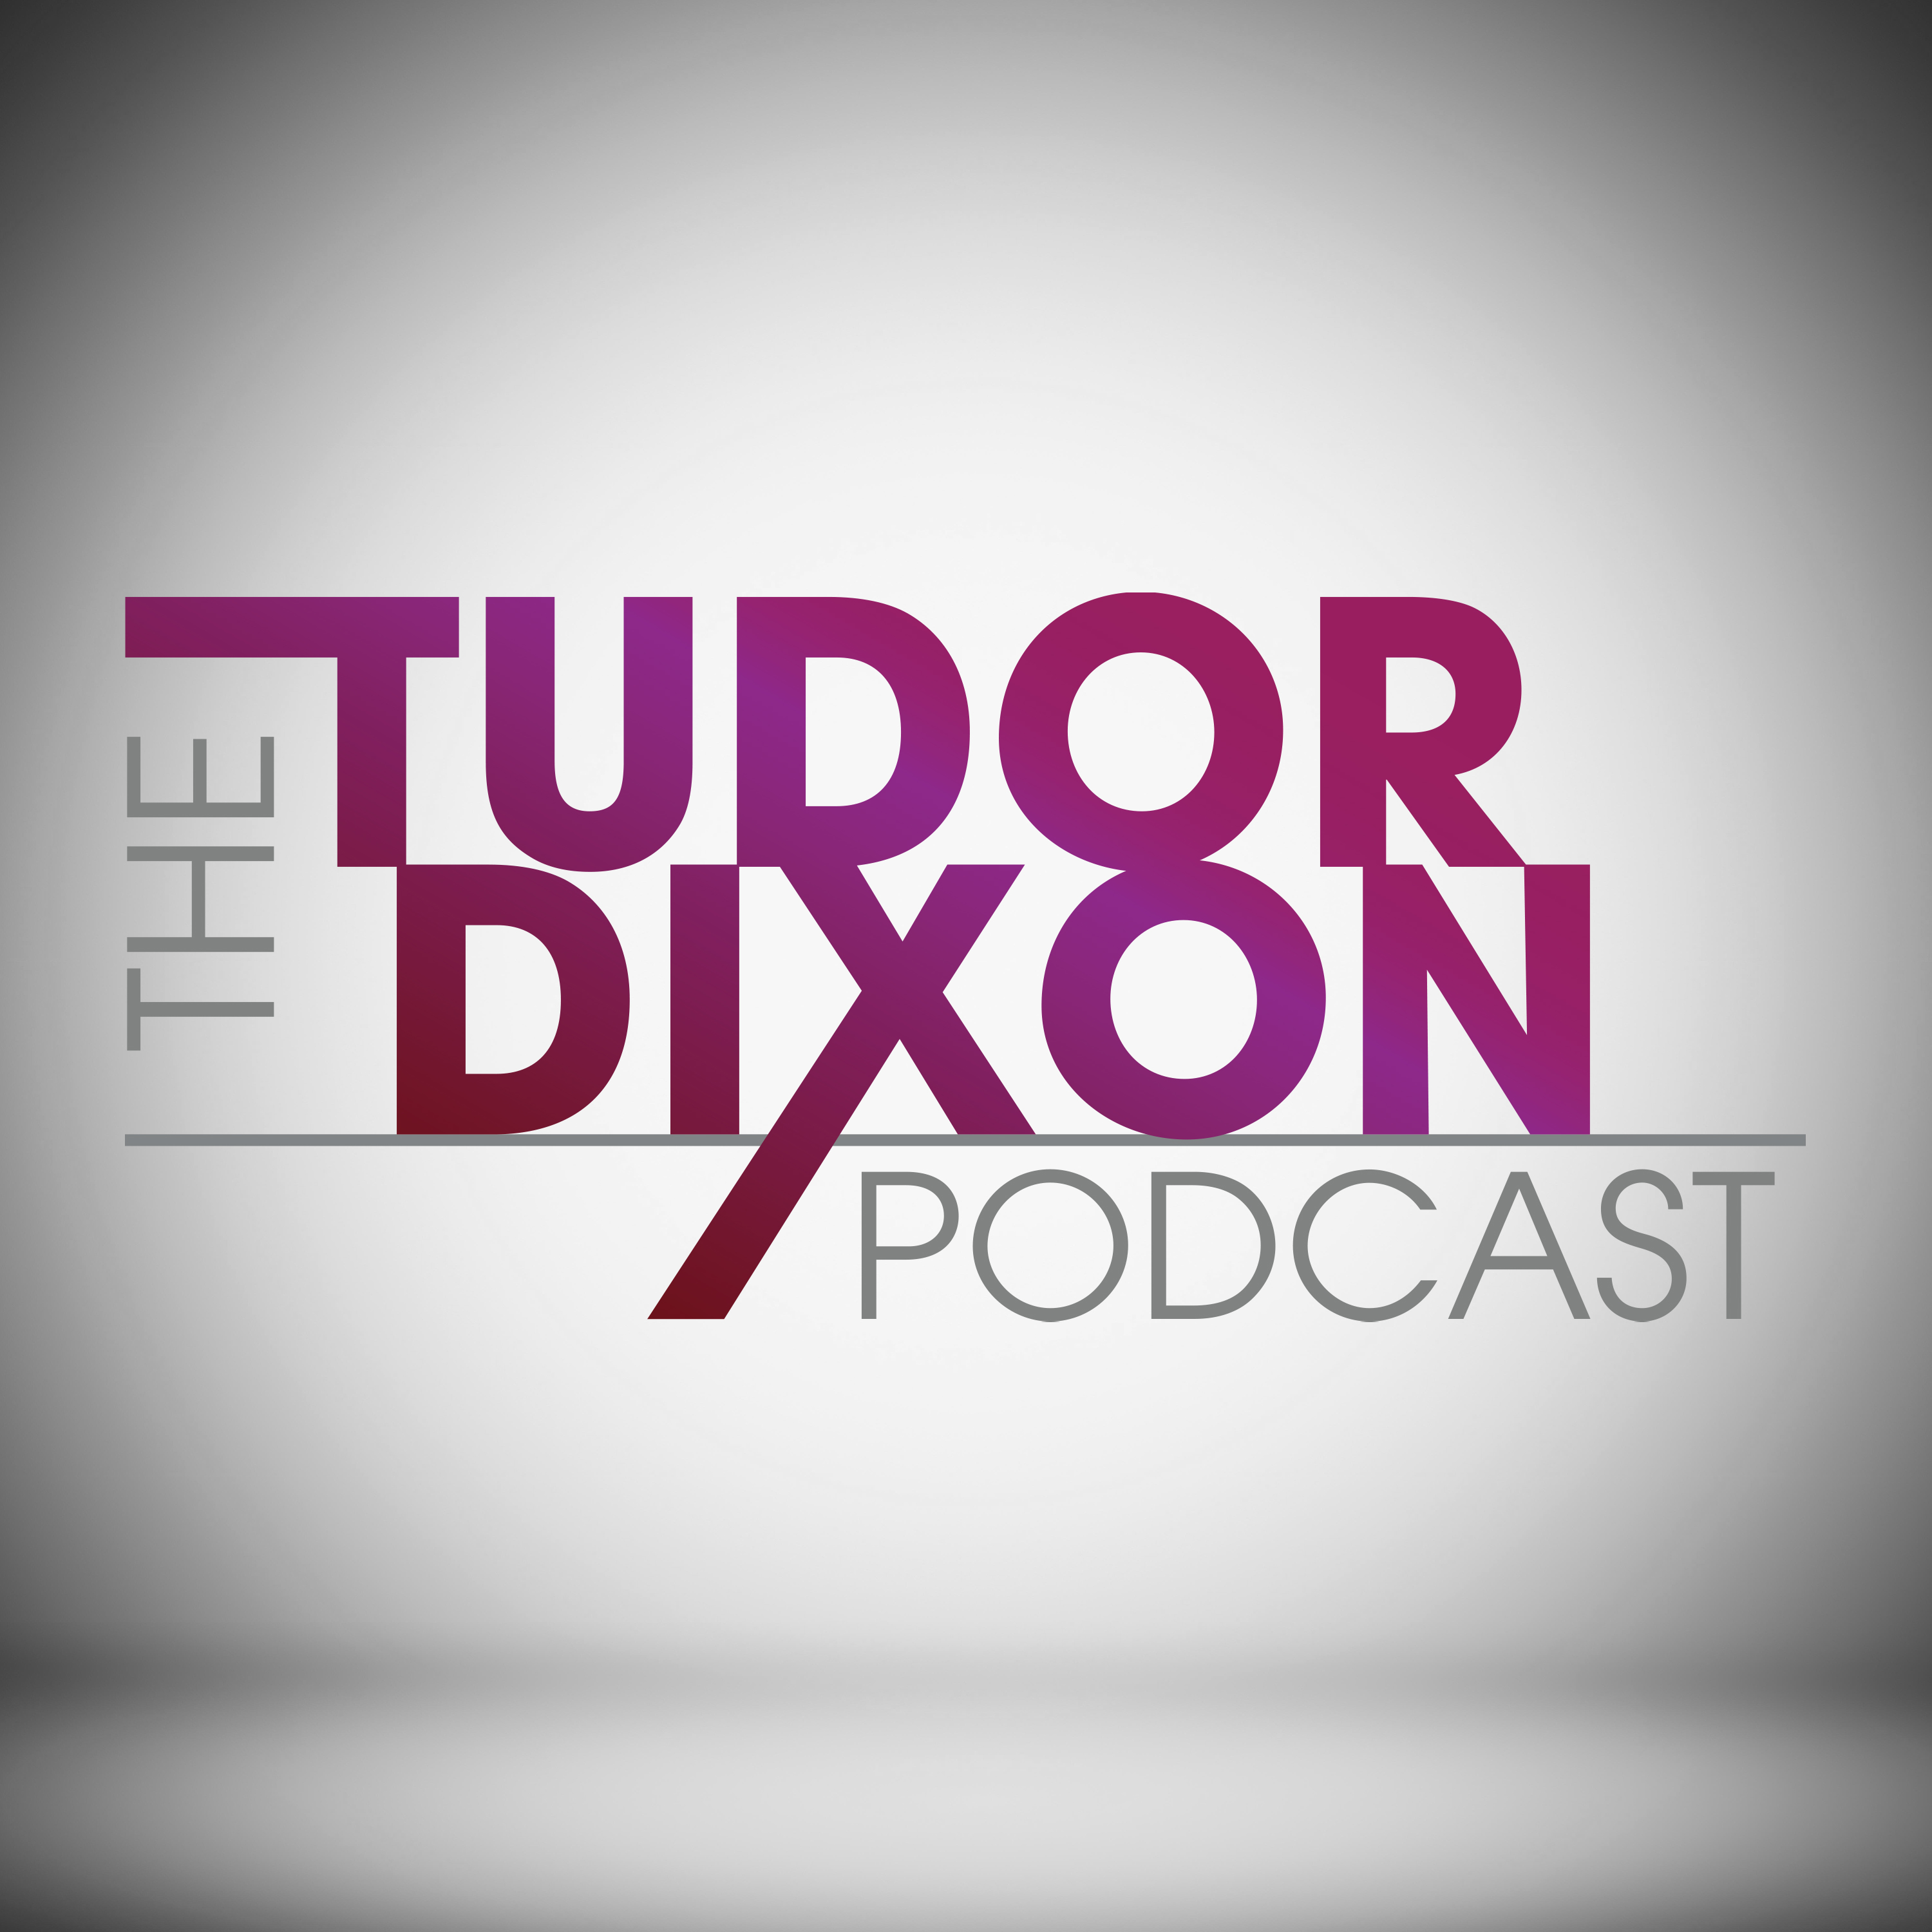 The Tudor Dixon Podcast: A Real Conversation about Abortion